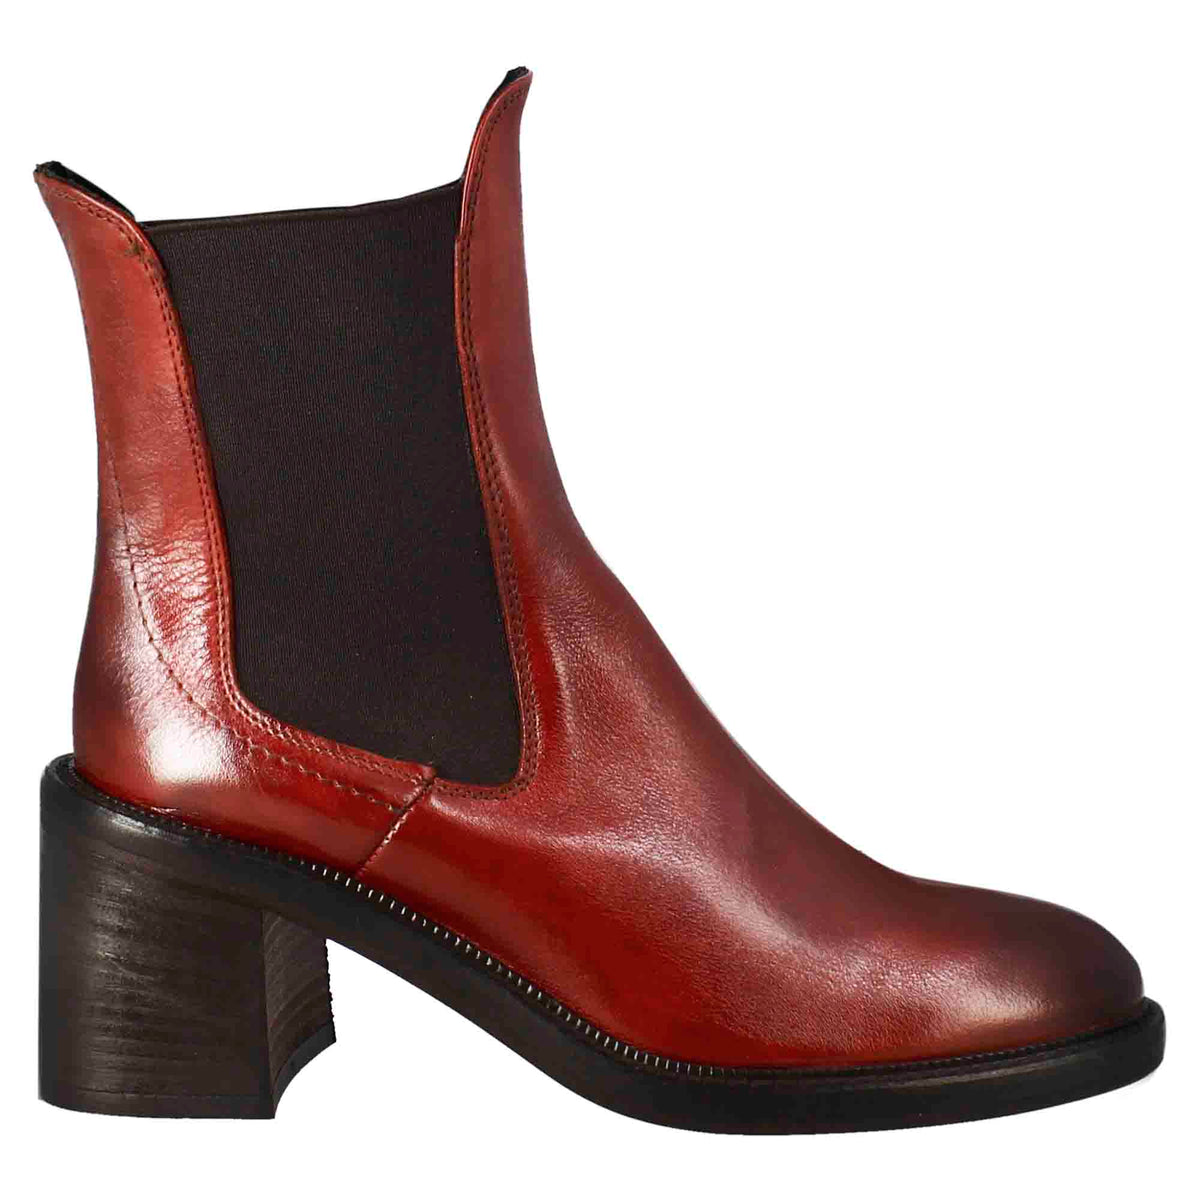 Women's chelsea boot with heel in red washed leather